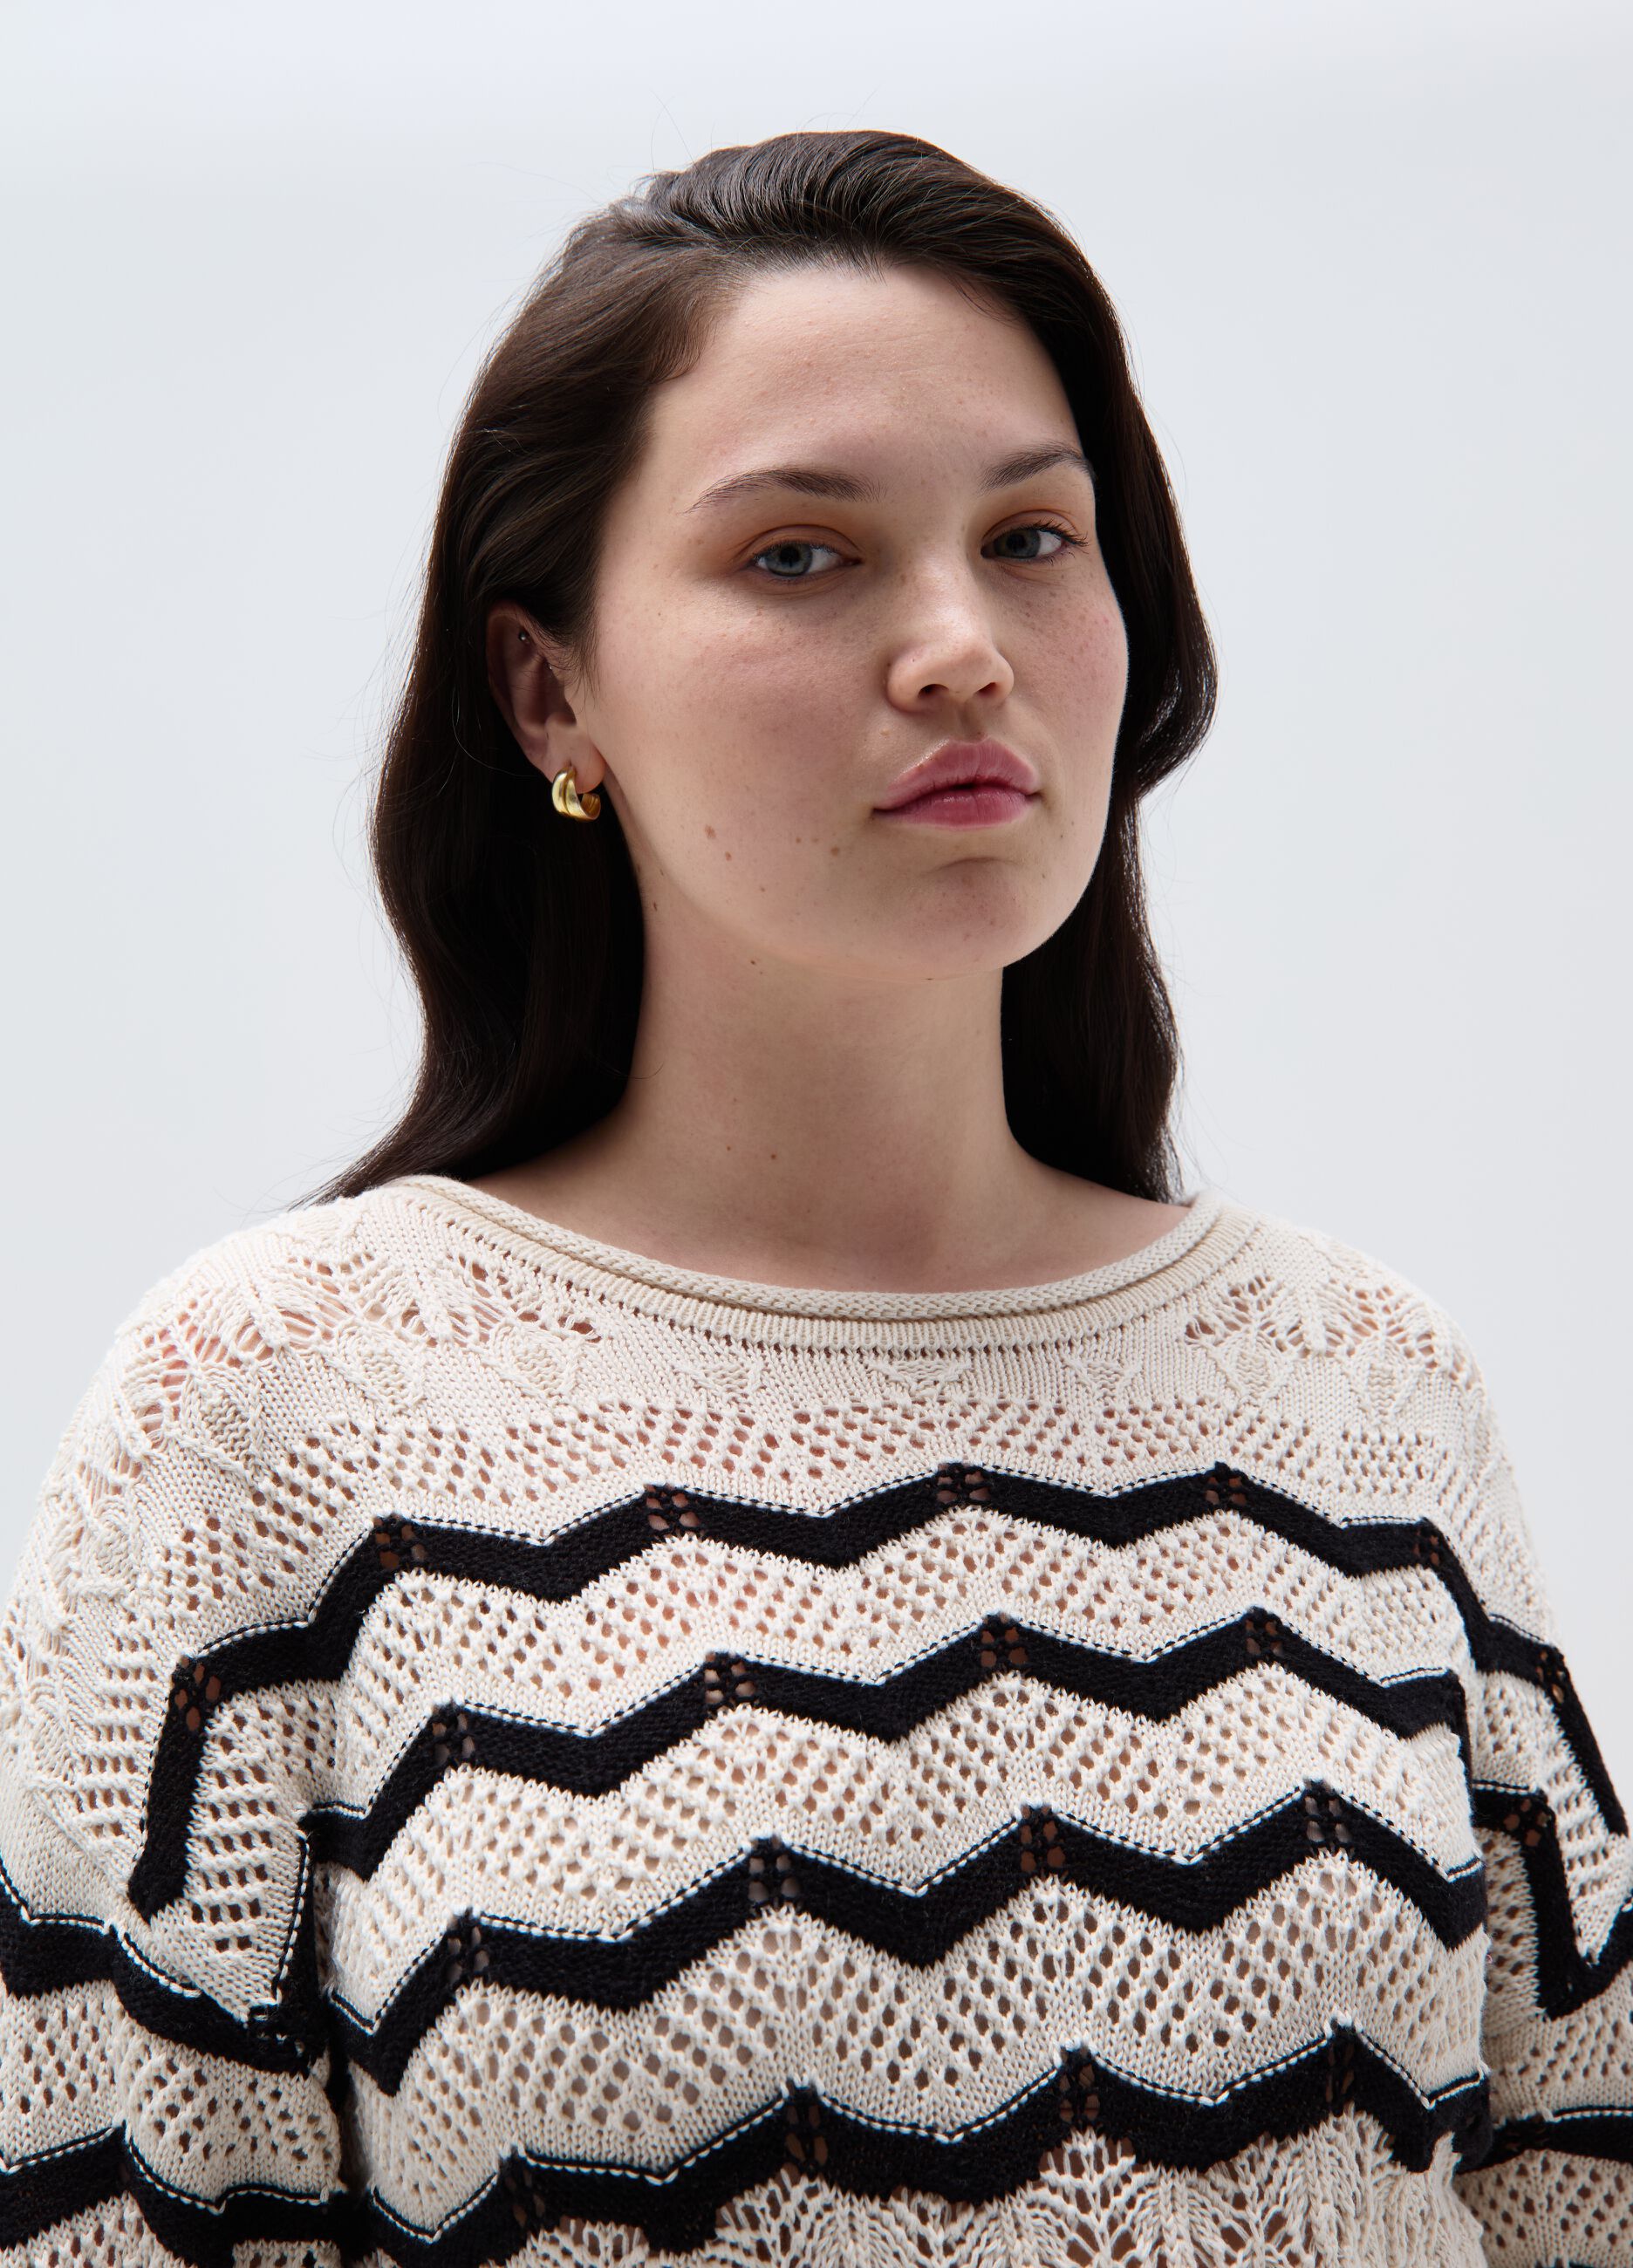 Curvy crochet pullover with zigzag design